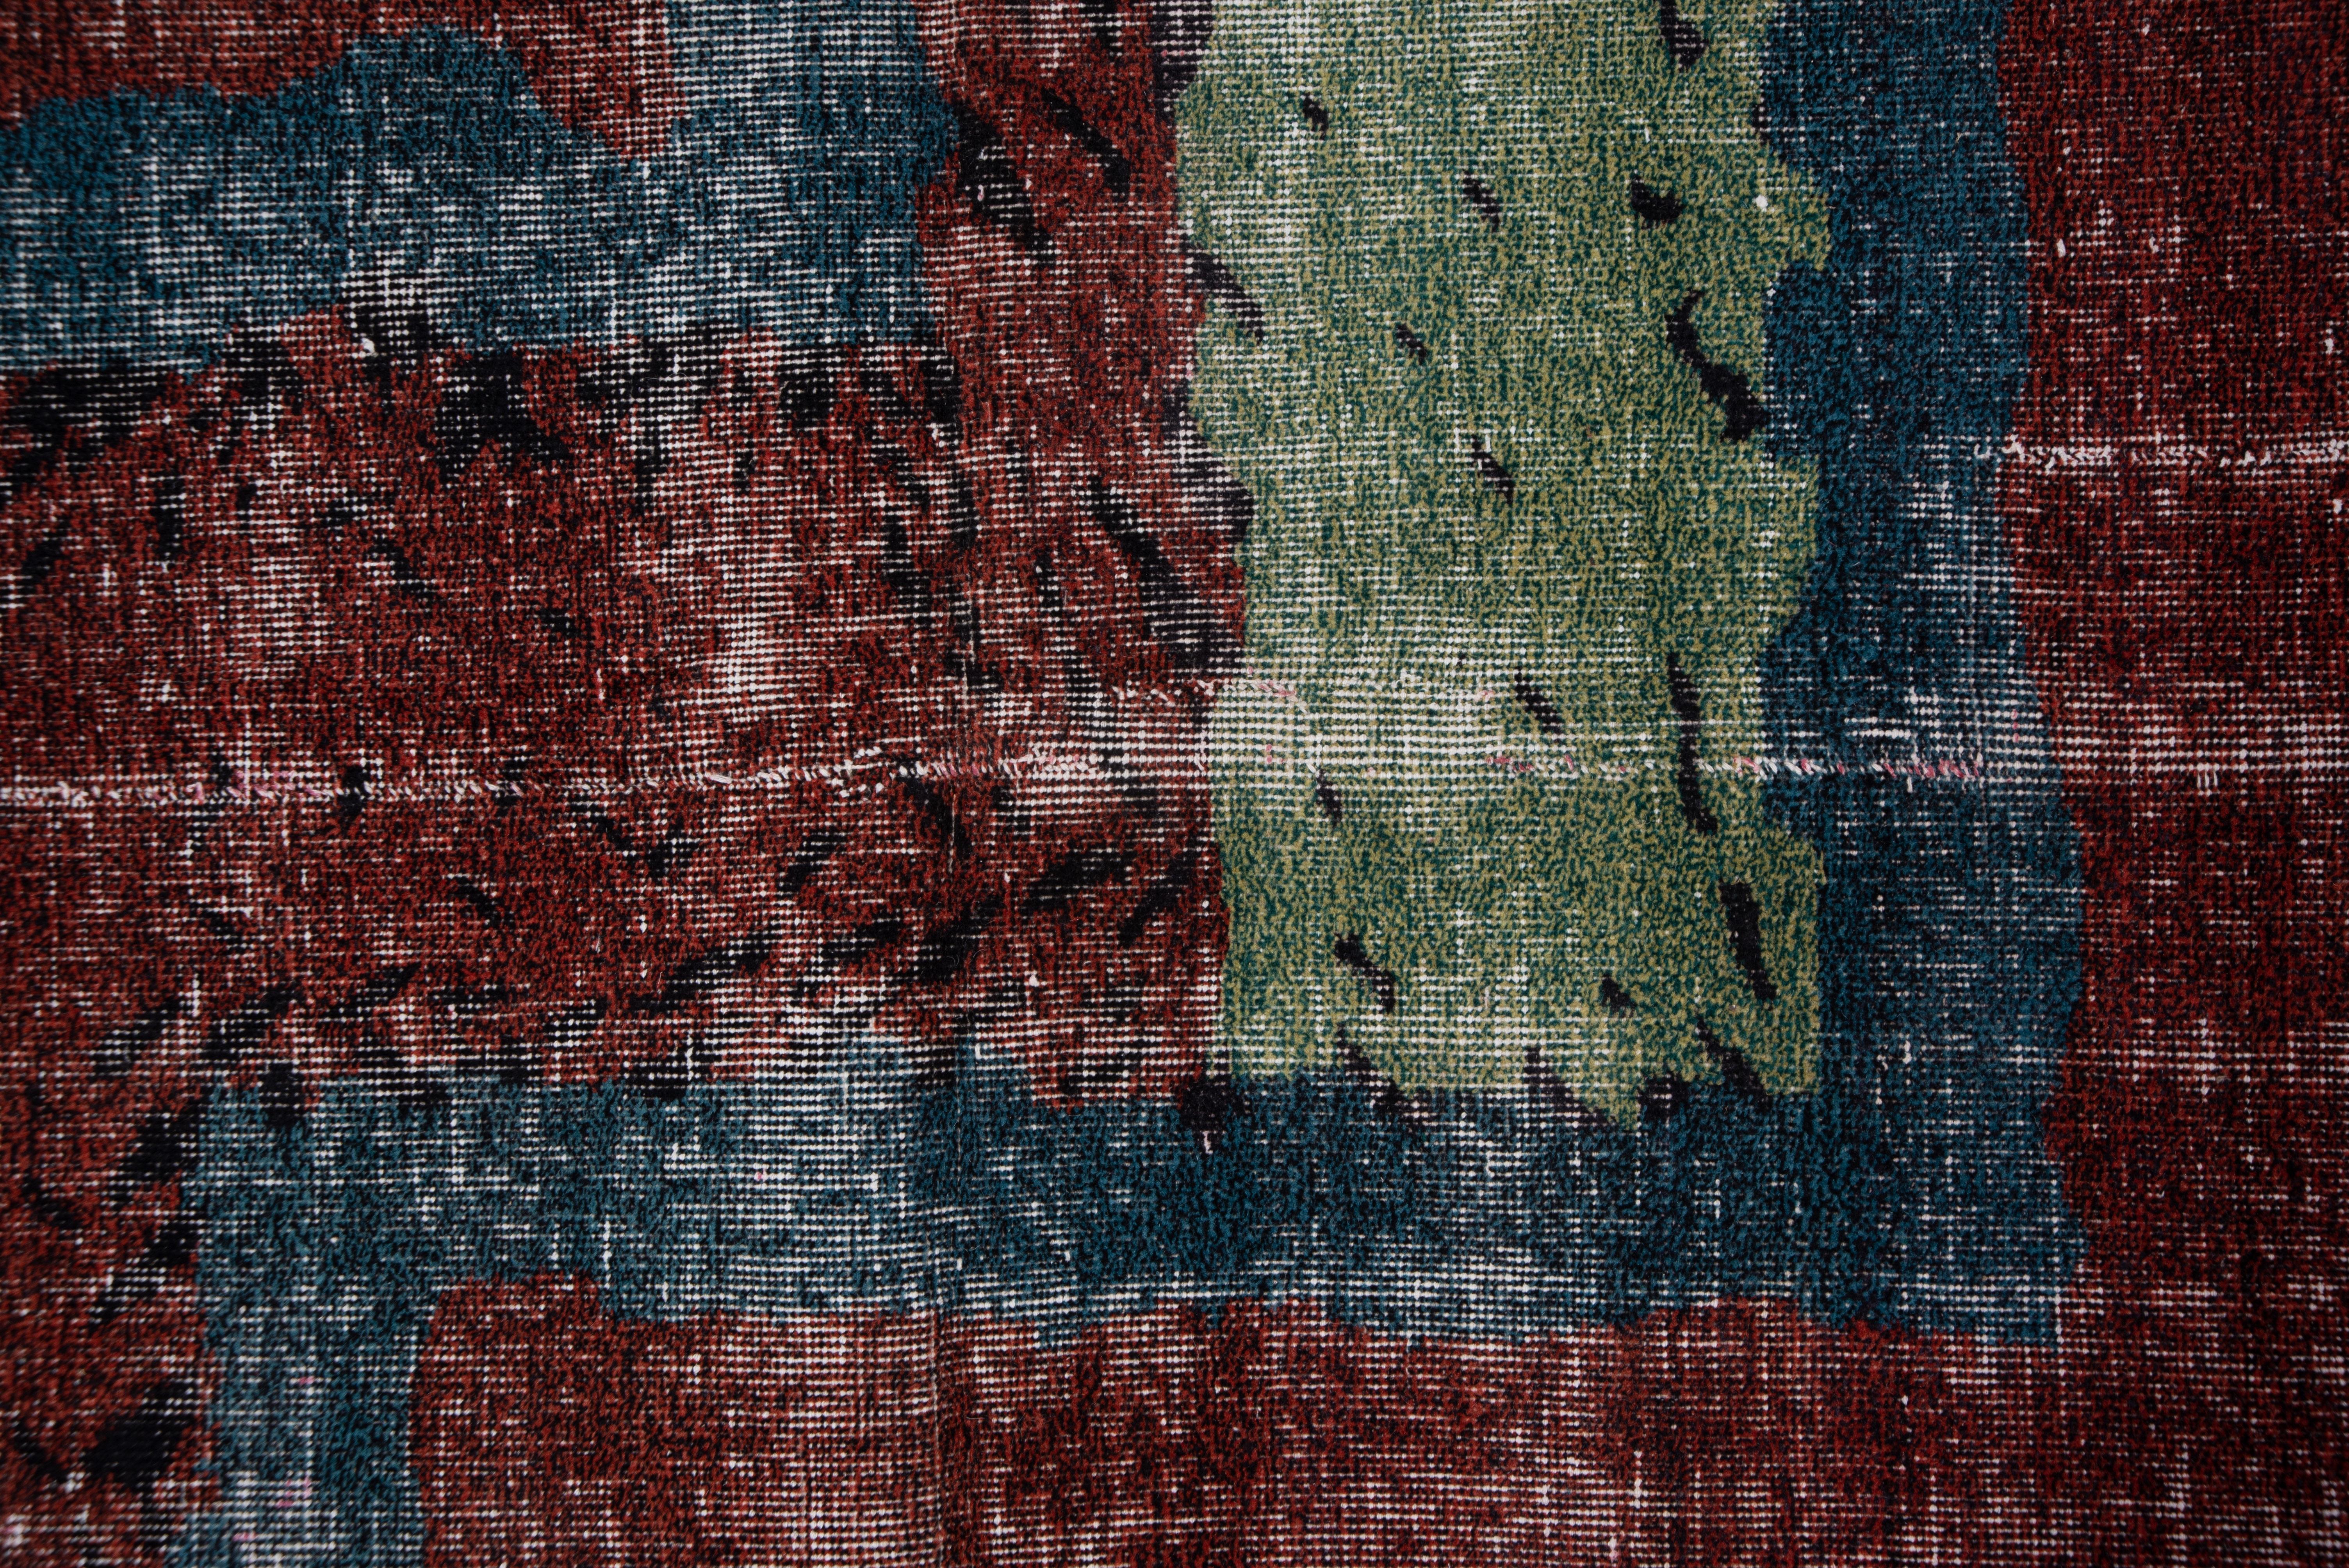 Lightly distressed, this borderless, simply geometric scatter shows a lipstick red field and light, bright blue bands forming an asymmetrically-placed rectangle enclosing a light green strip accented in black.